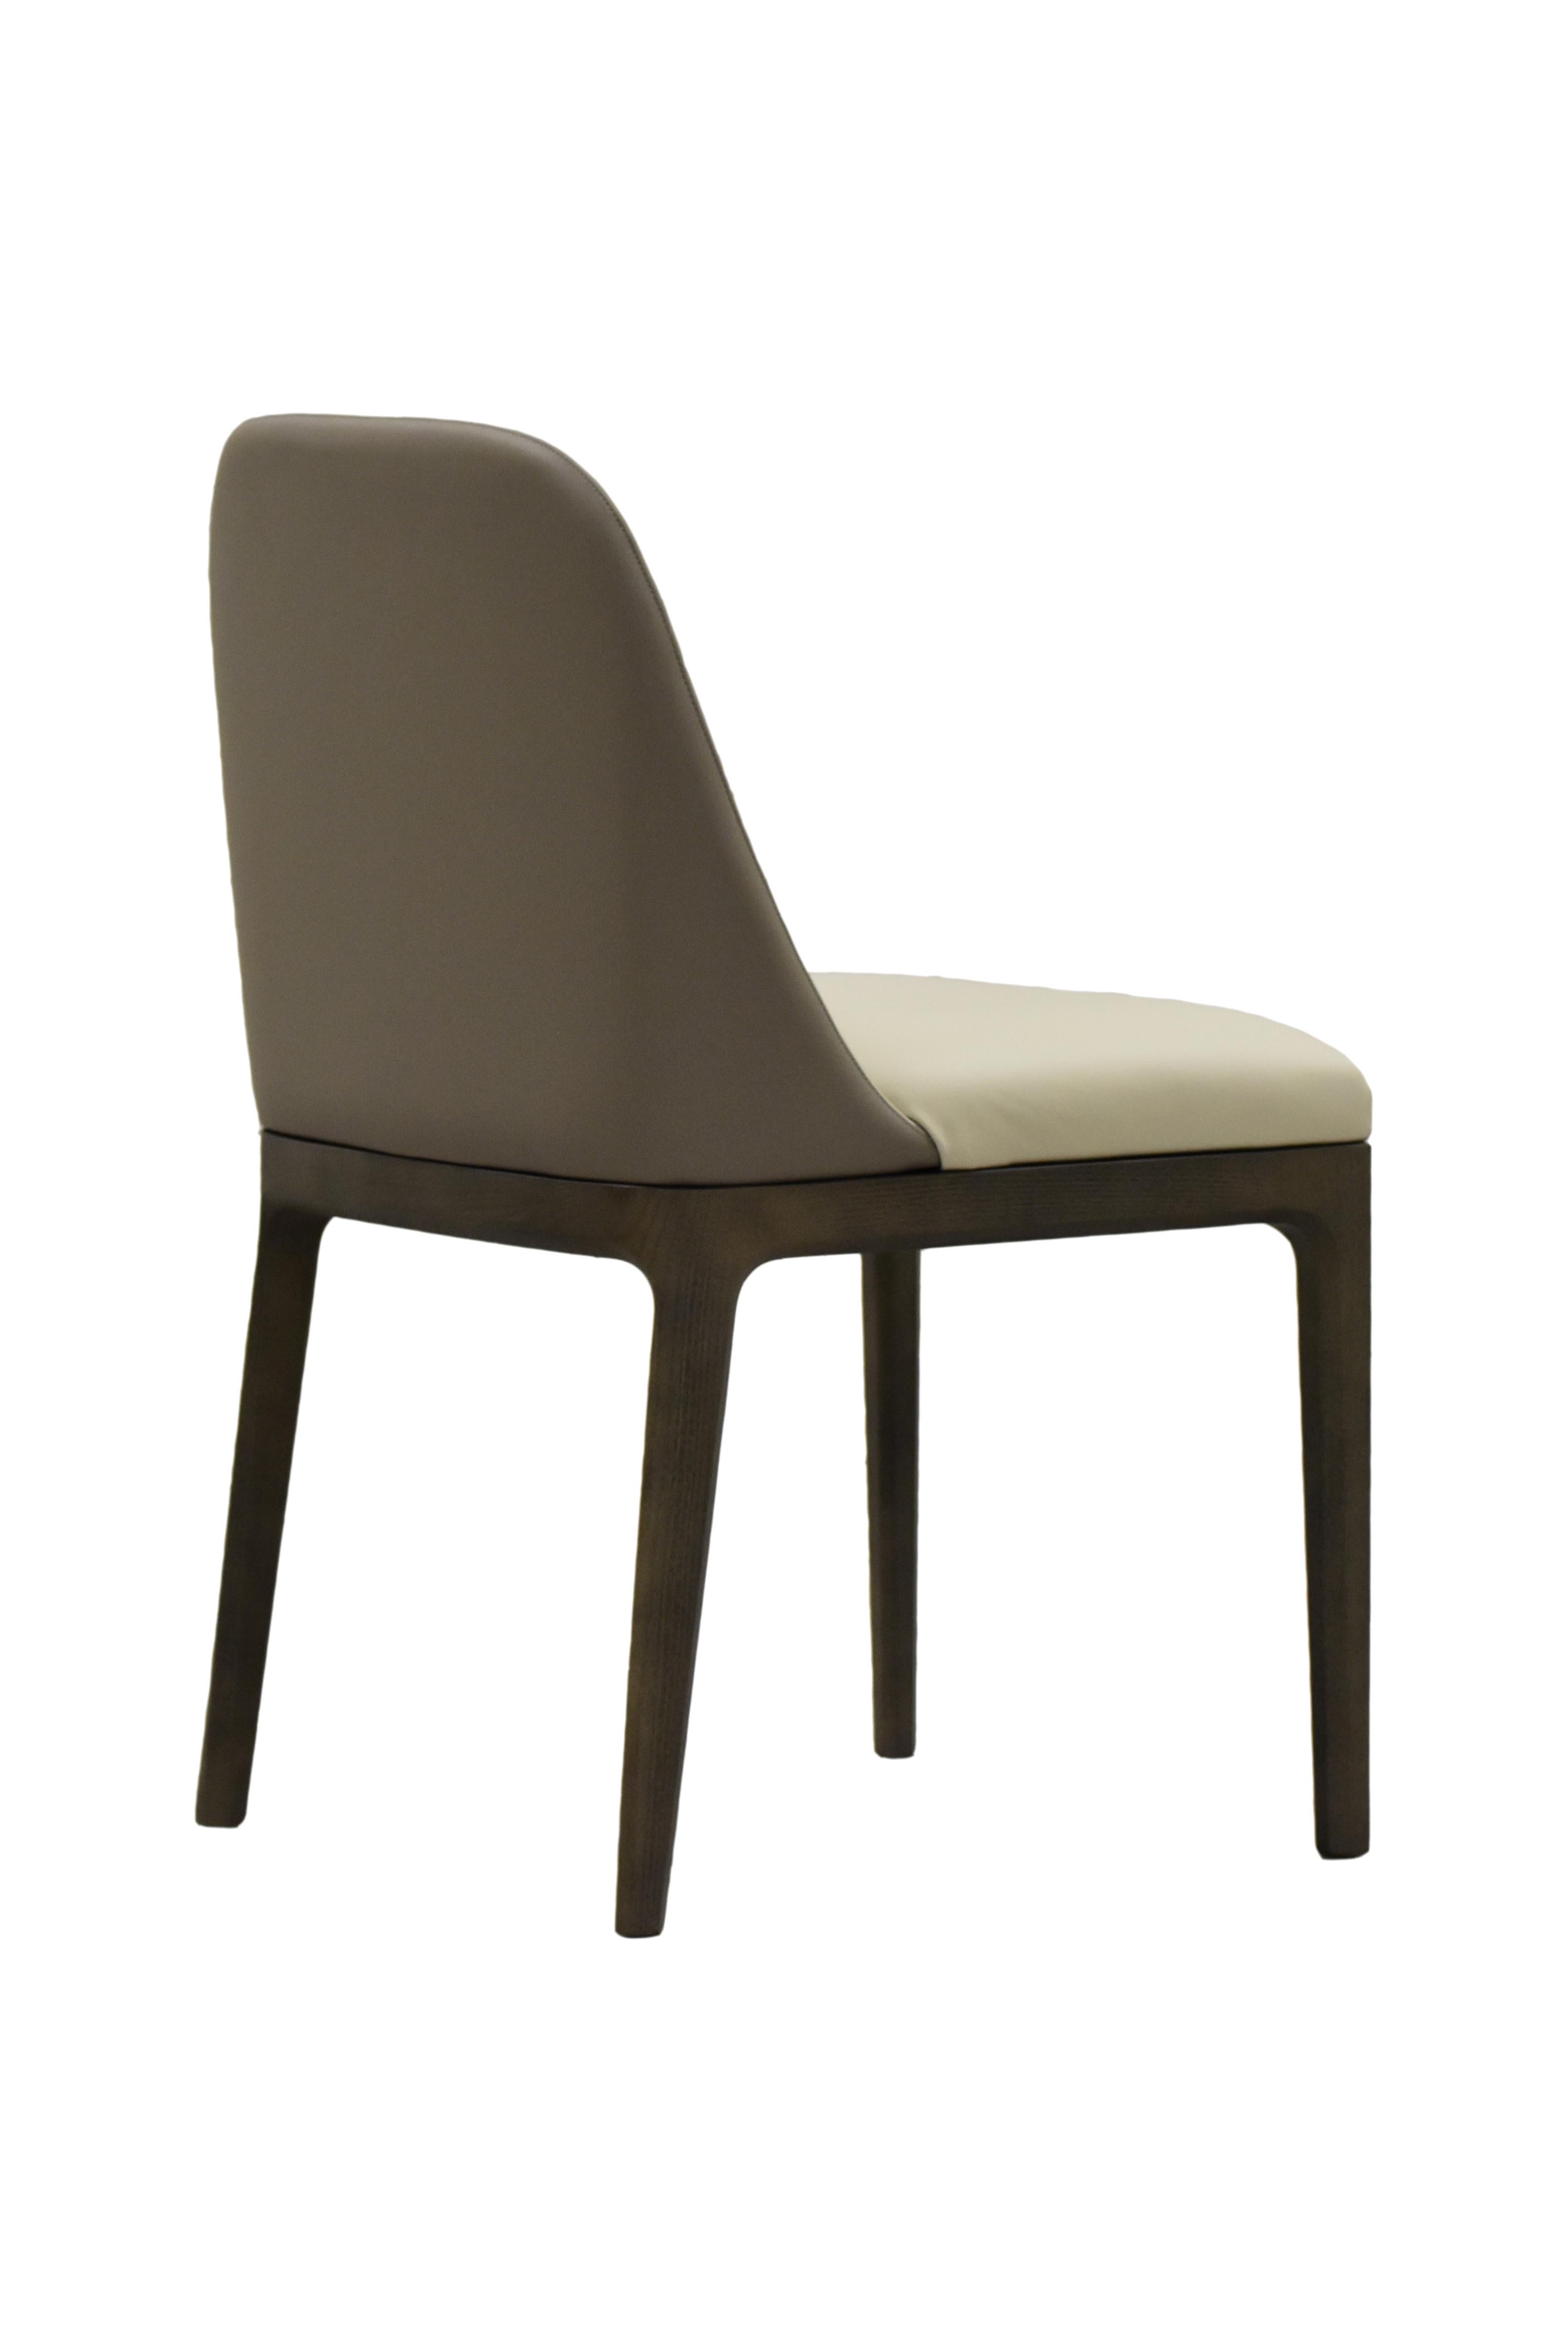 Bellagio Contemporary Upholsterd Dining Chair in Ashwood  4